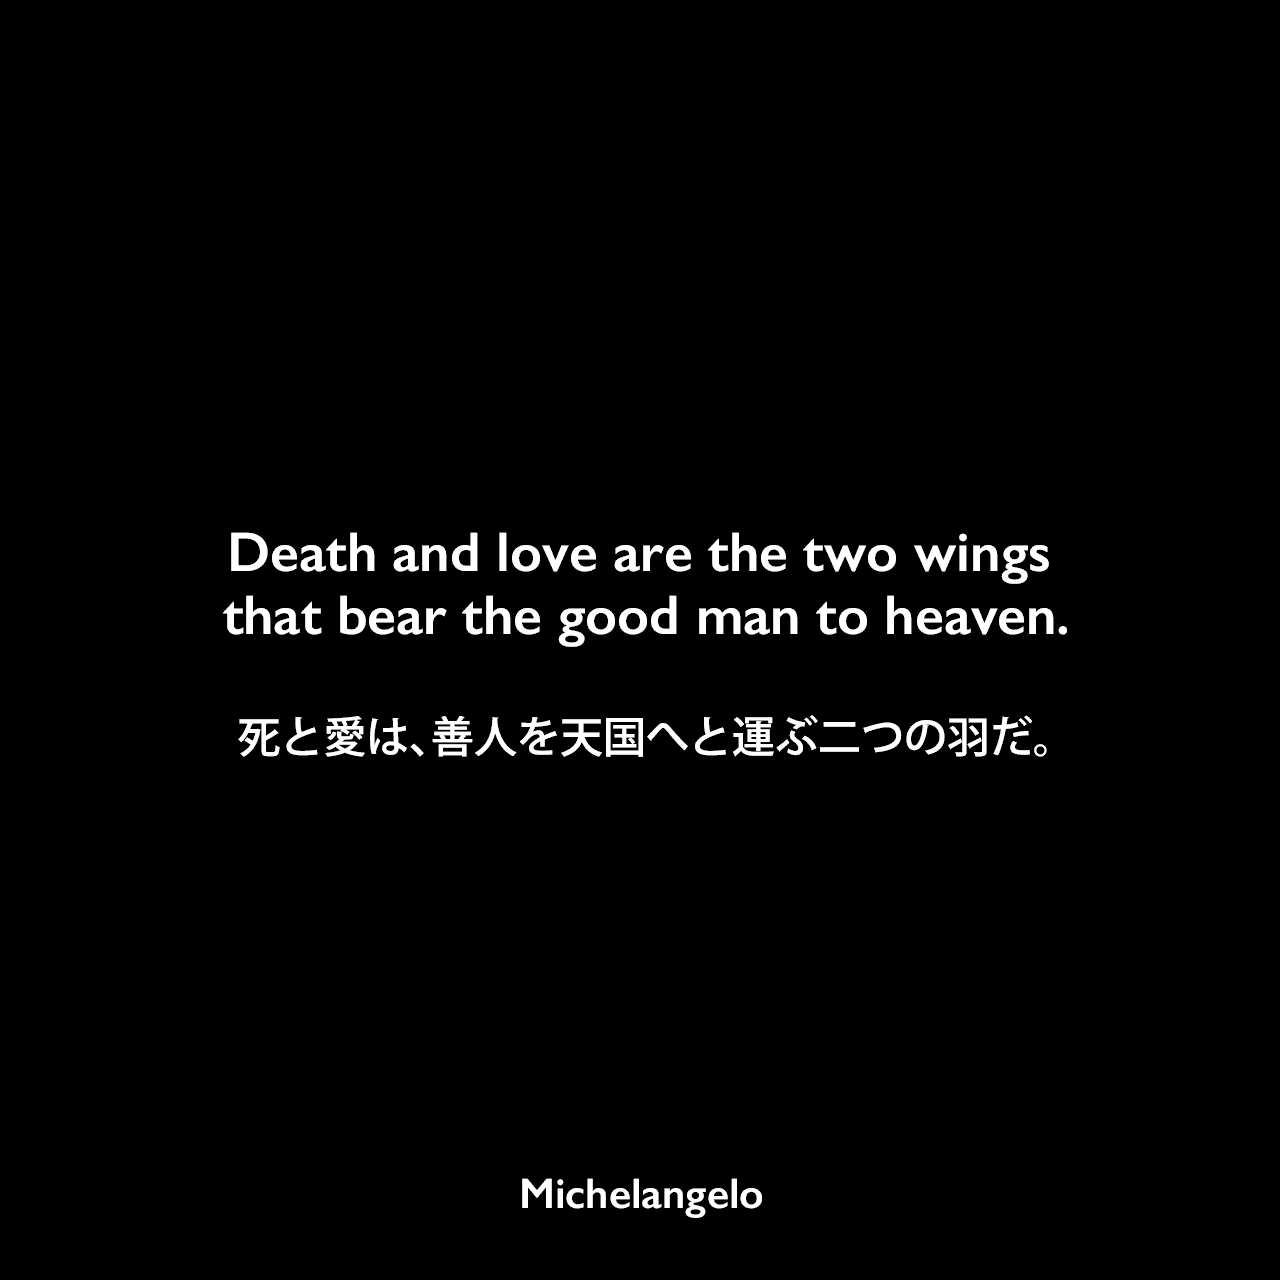 Death and love are the two wings that bear the good man to heaven.死と愛は、善人を天国へと運ぶ二つの羽だ。Michelangelo